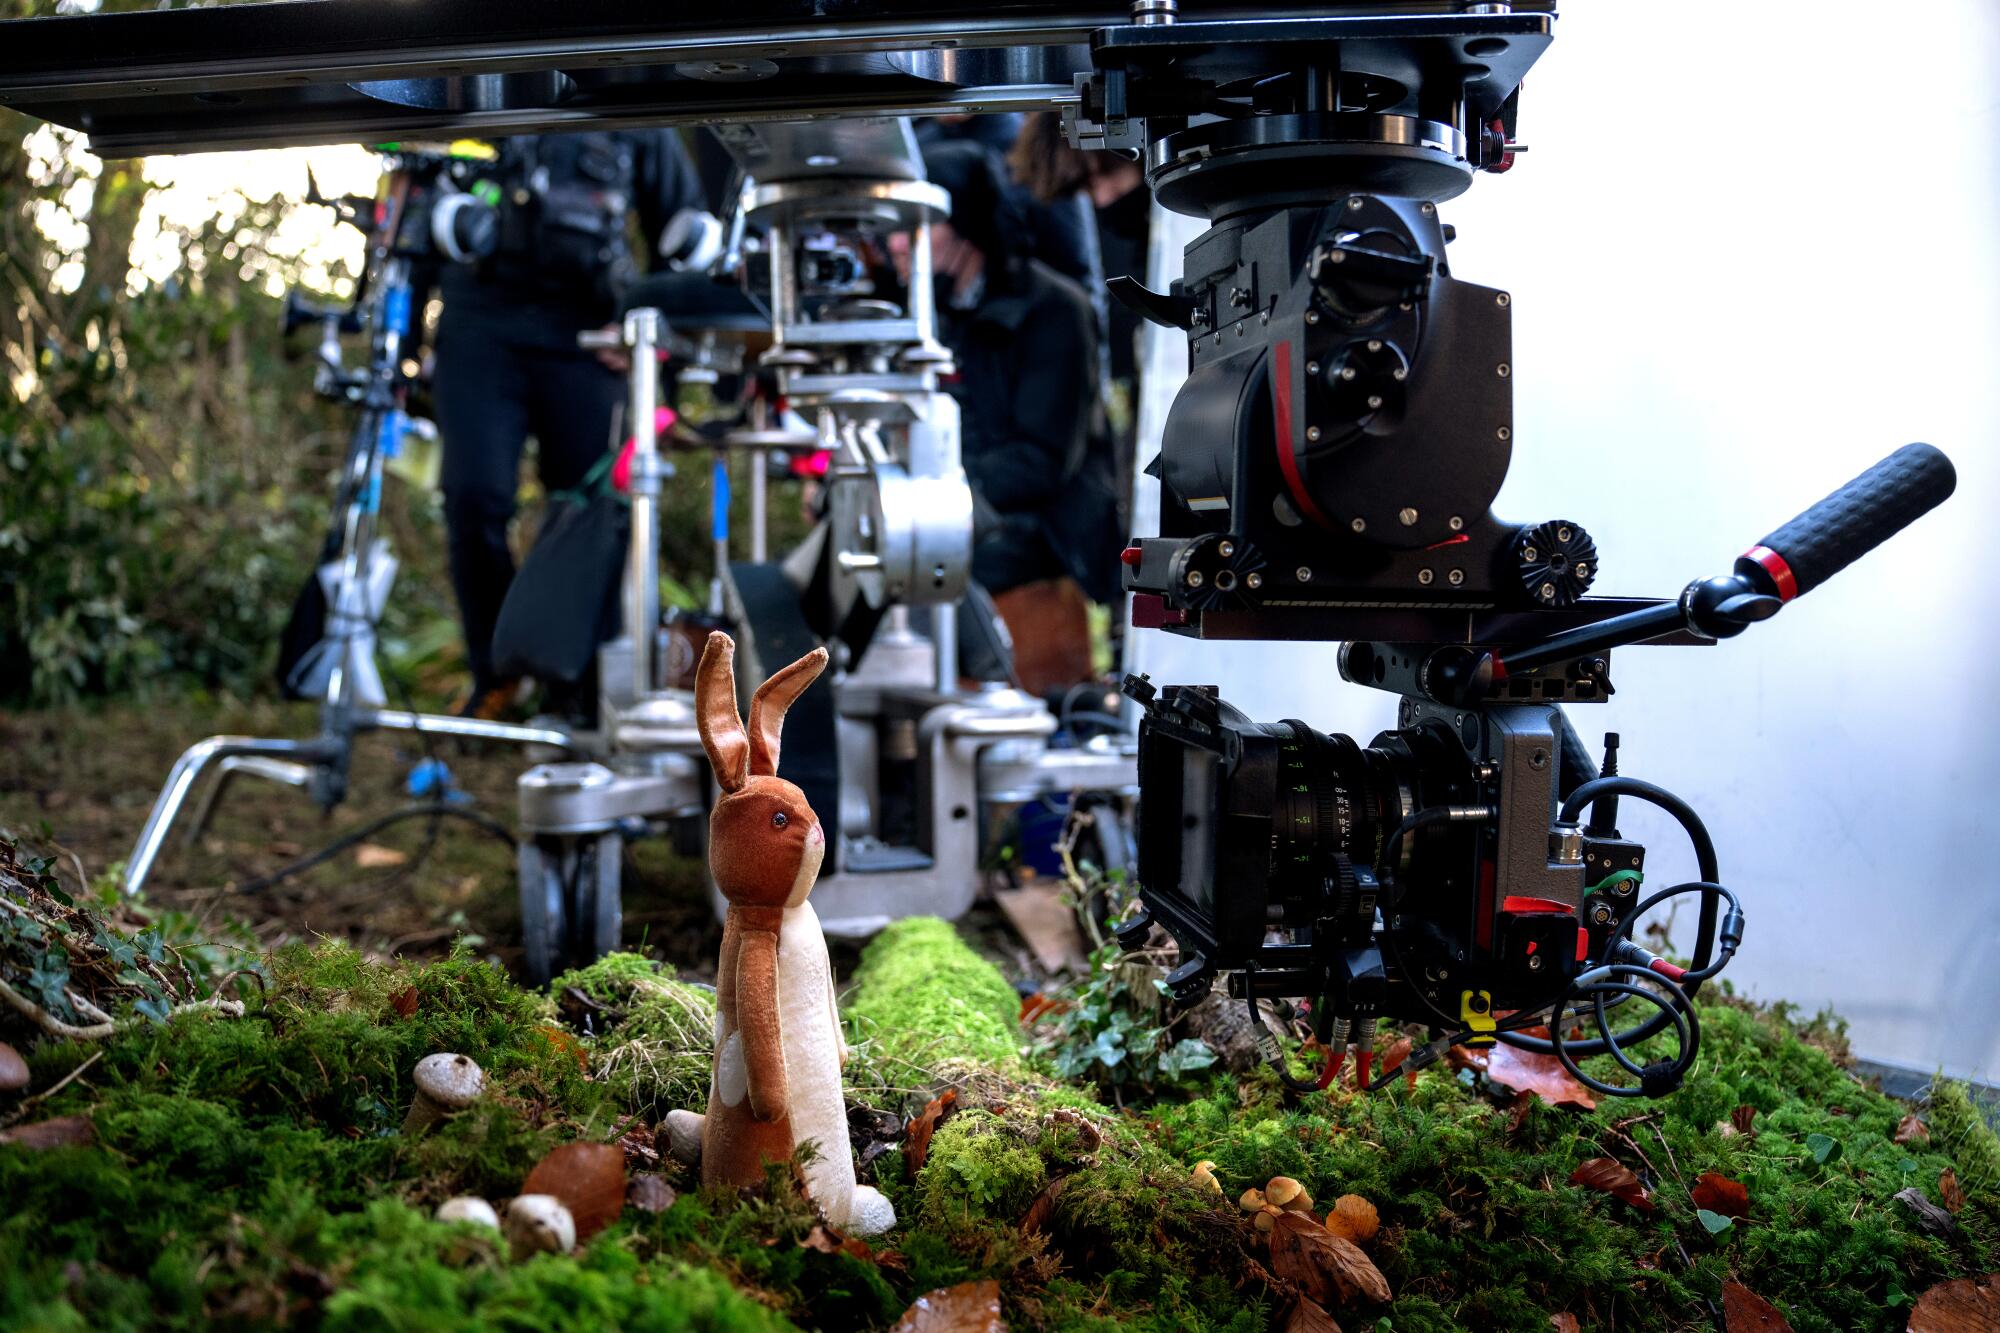 A stuffed bunny on a set with cameras on dollies around it.